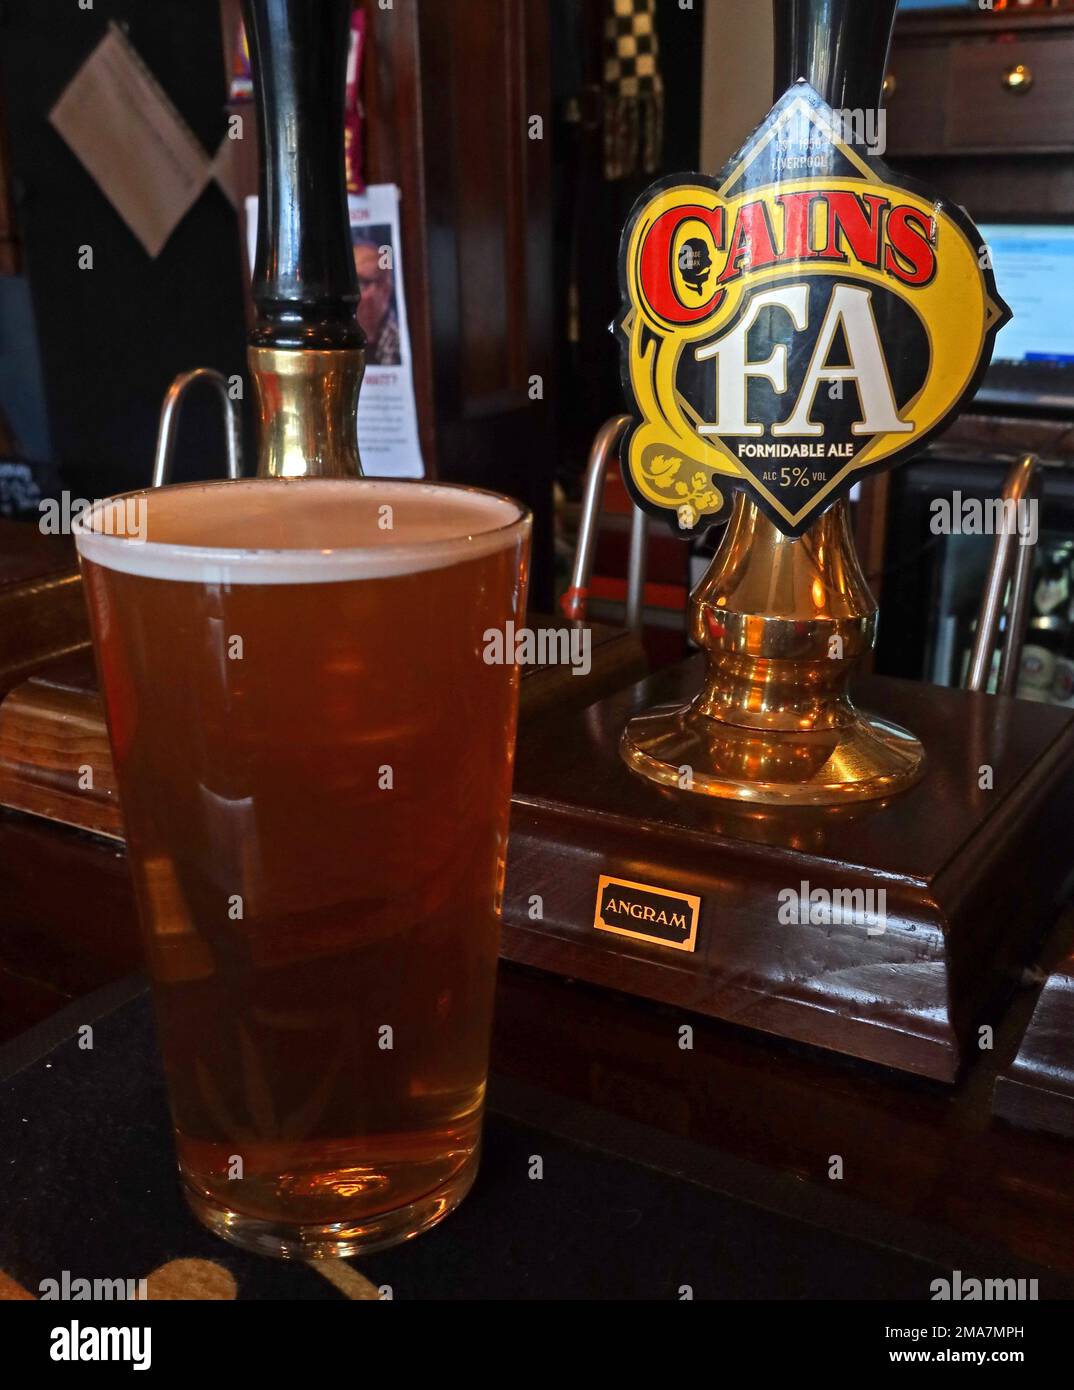 Cains FA Forciable Ale Pump in Doctor Duncan's Bar, St John's LN, Queen Square, Liverpool, Merseyside, England, UK, L1 1HF Stockfoto